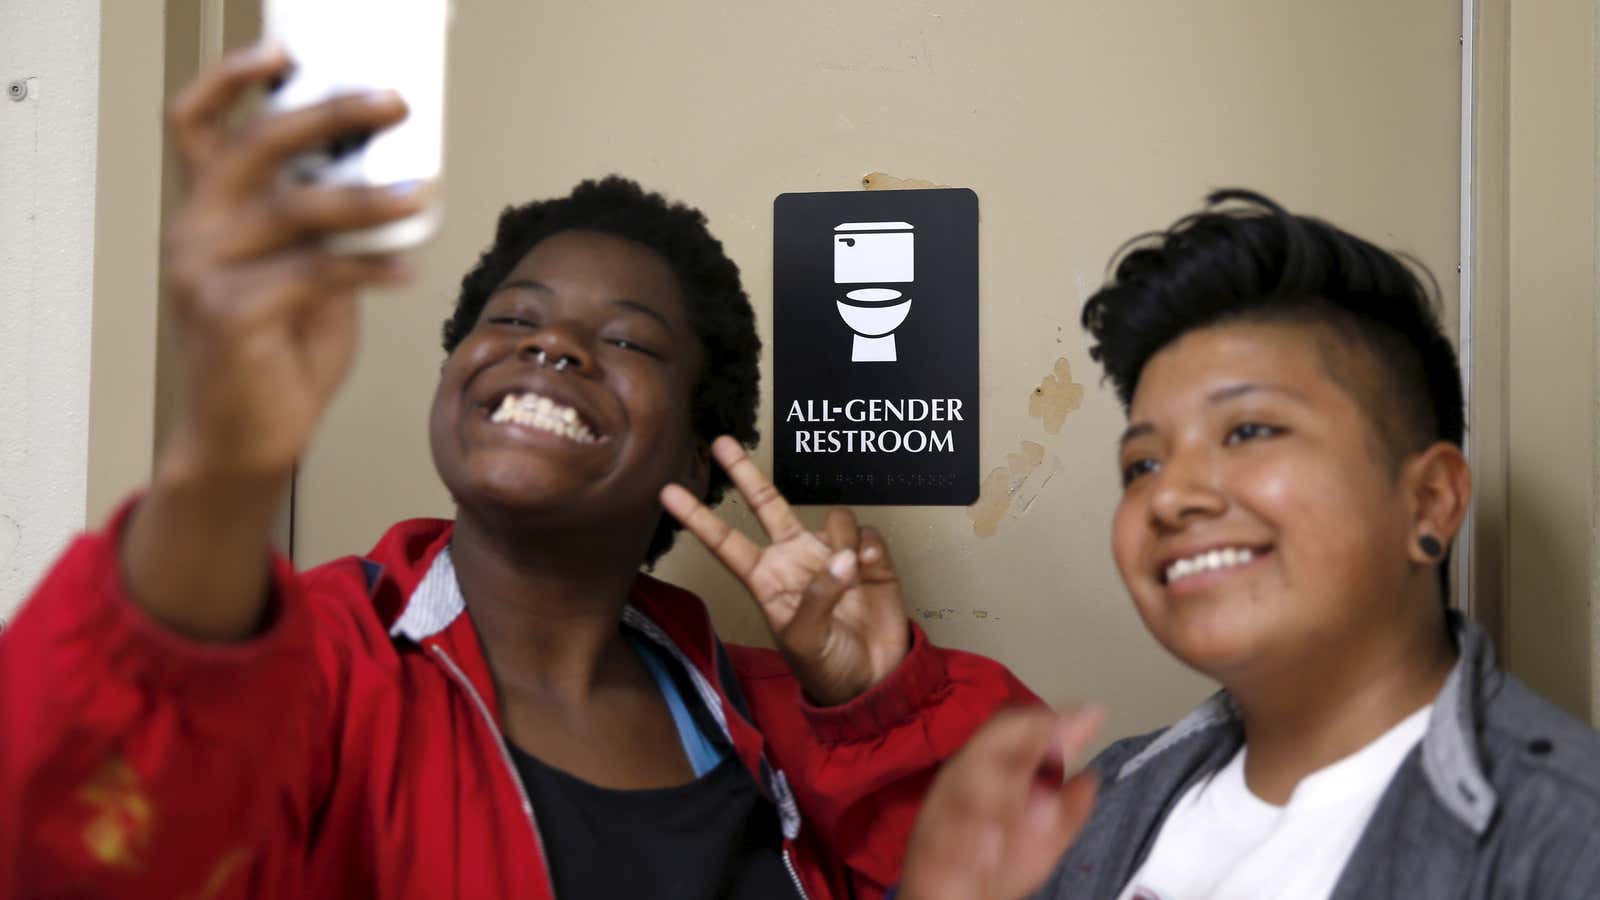 Kween Robinson, 17, (L) and Alonzo Hernandez, 16, pose for a selfie in front of the first gender-neutral restroom in the Los Angeles school district. The US still does not know how many trans and gender-nonconforming kids go to its high schools, but it is finally about to find out